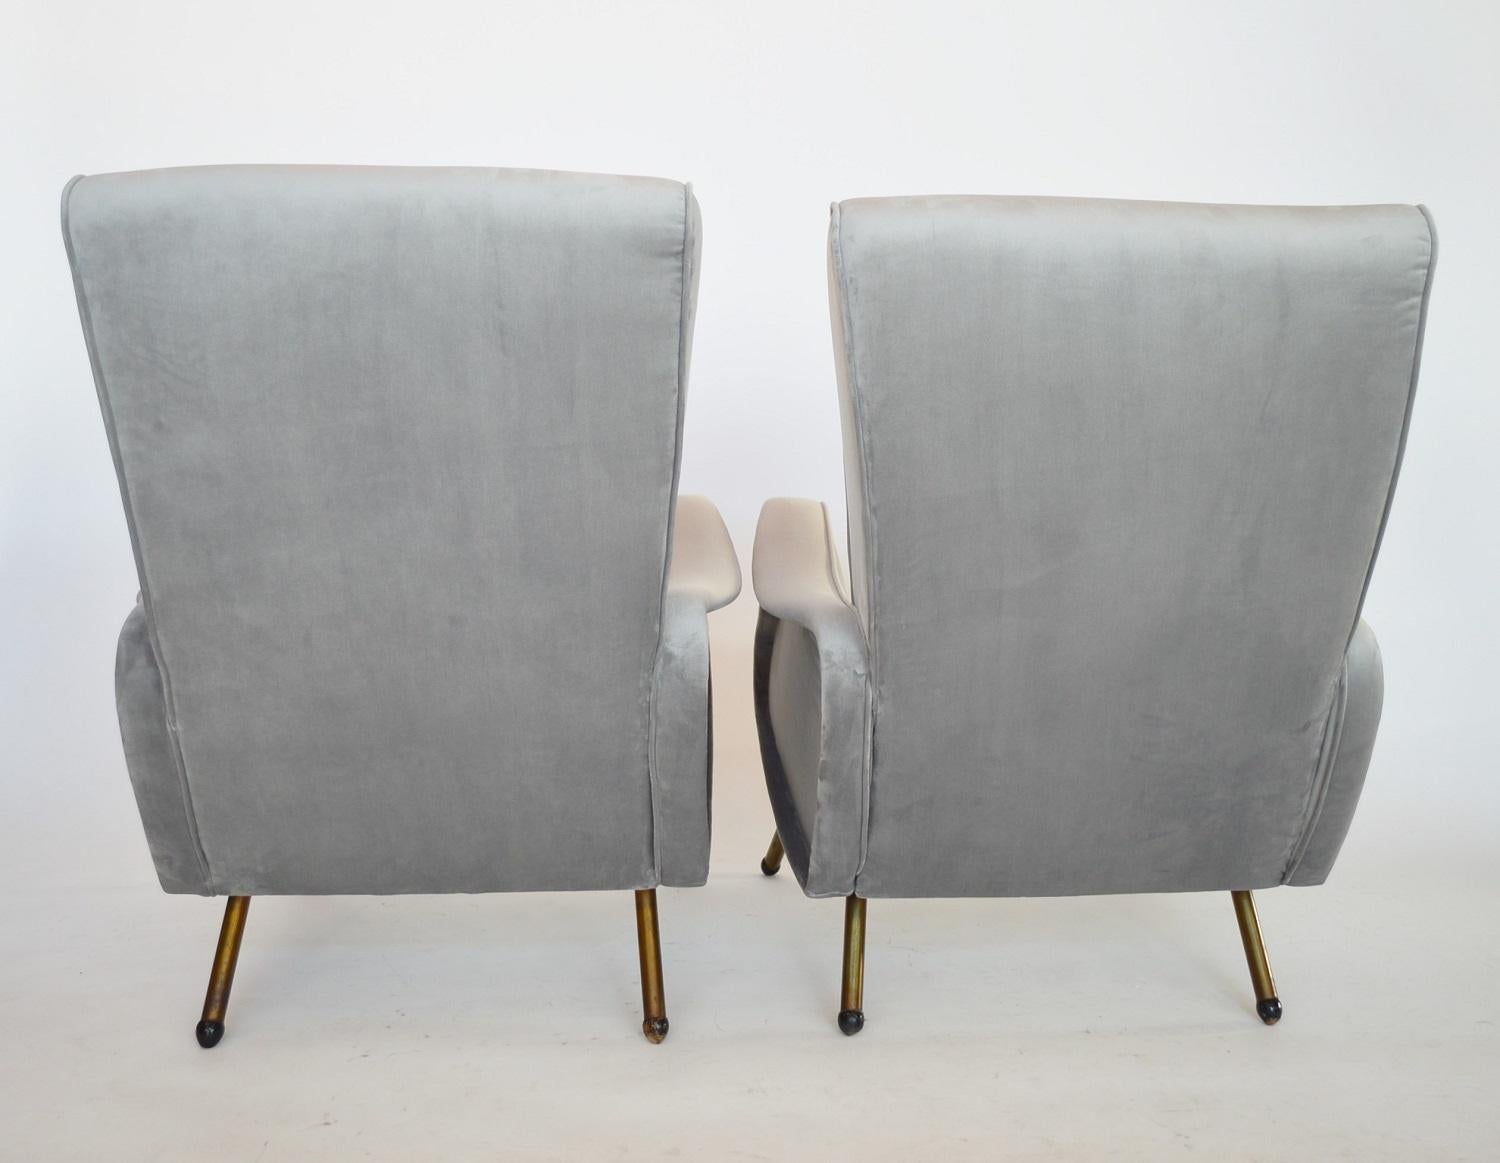 Italian Midcentury Armchairs Restored and Reupholstered in Grey Velvet, 1950s 6